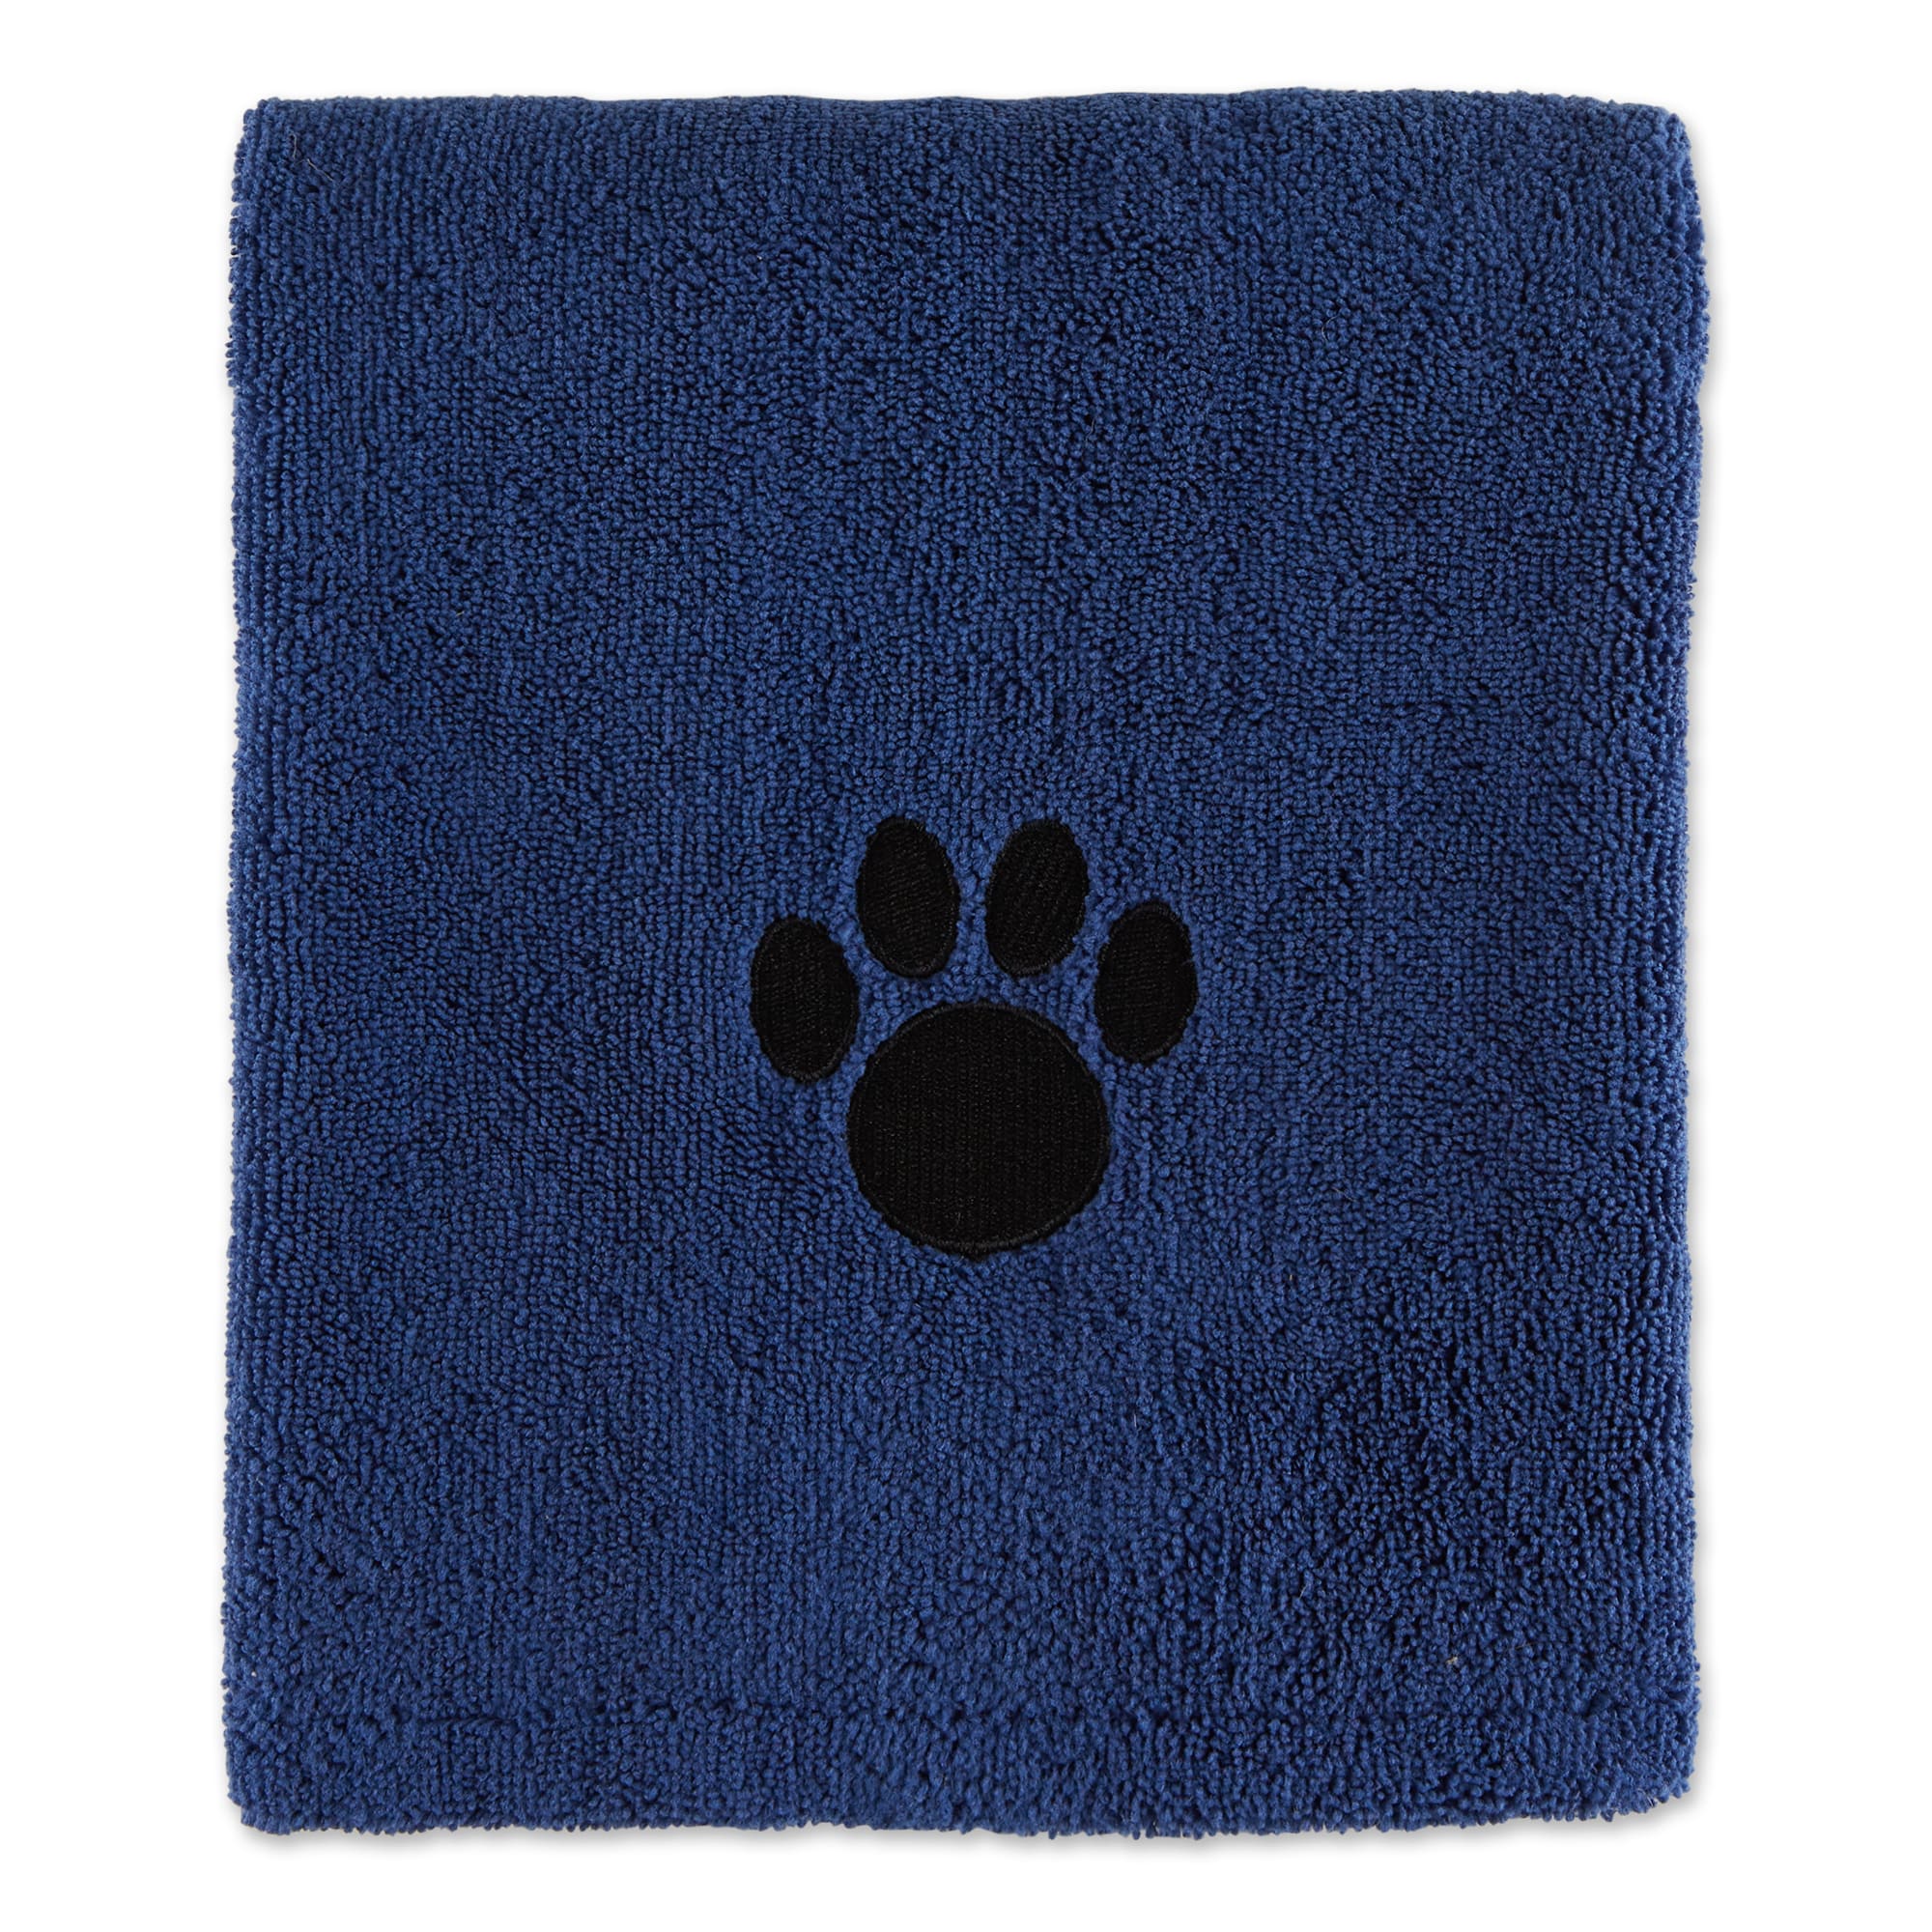 Bone Dry Navy Embroidered Paw Pet Towel, 44